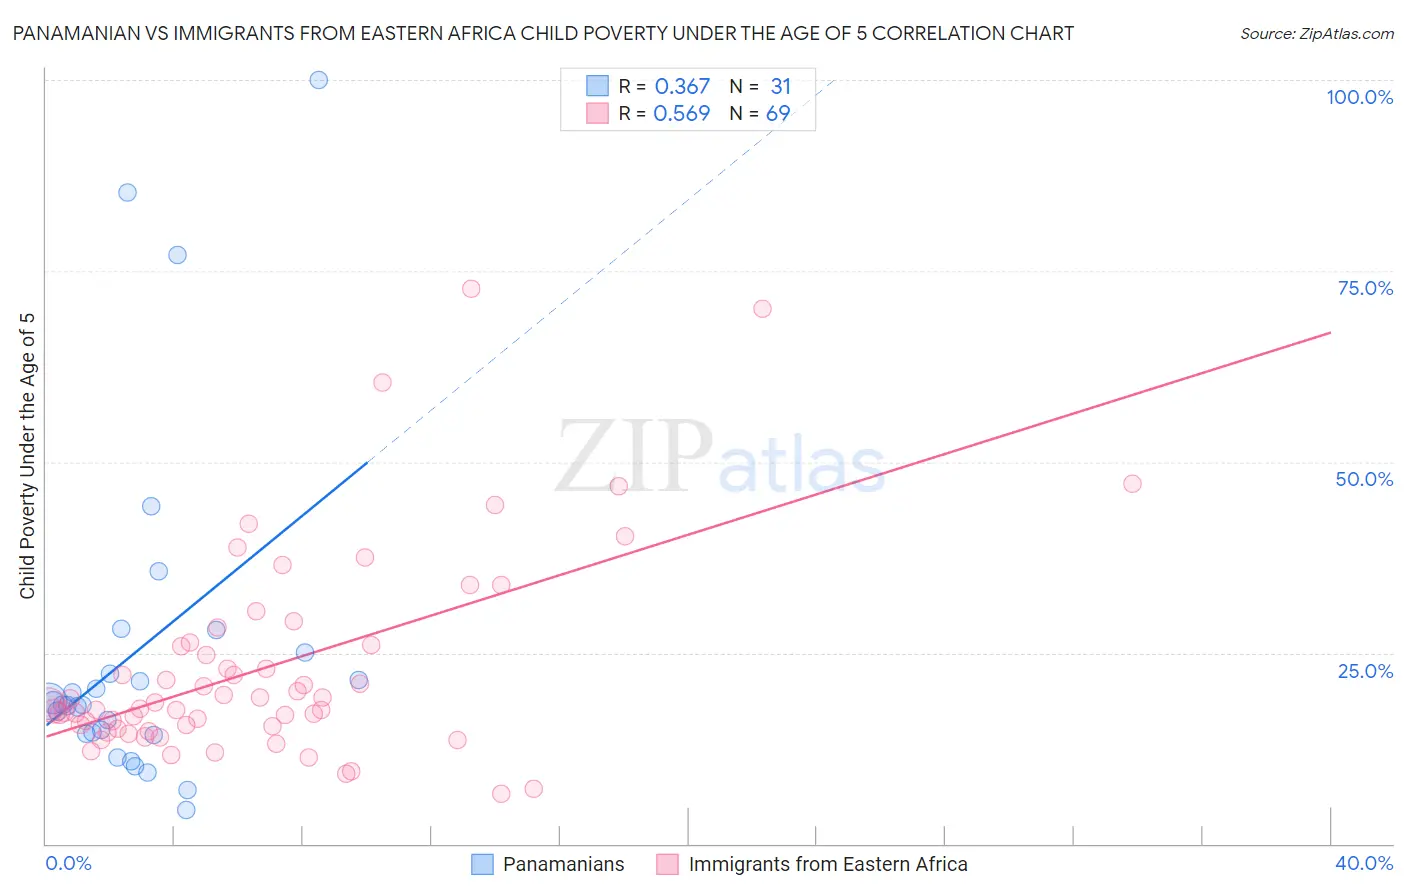 Panamanian vs Immigrants from Eastern Africa Child Poverty Under the Age of 5